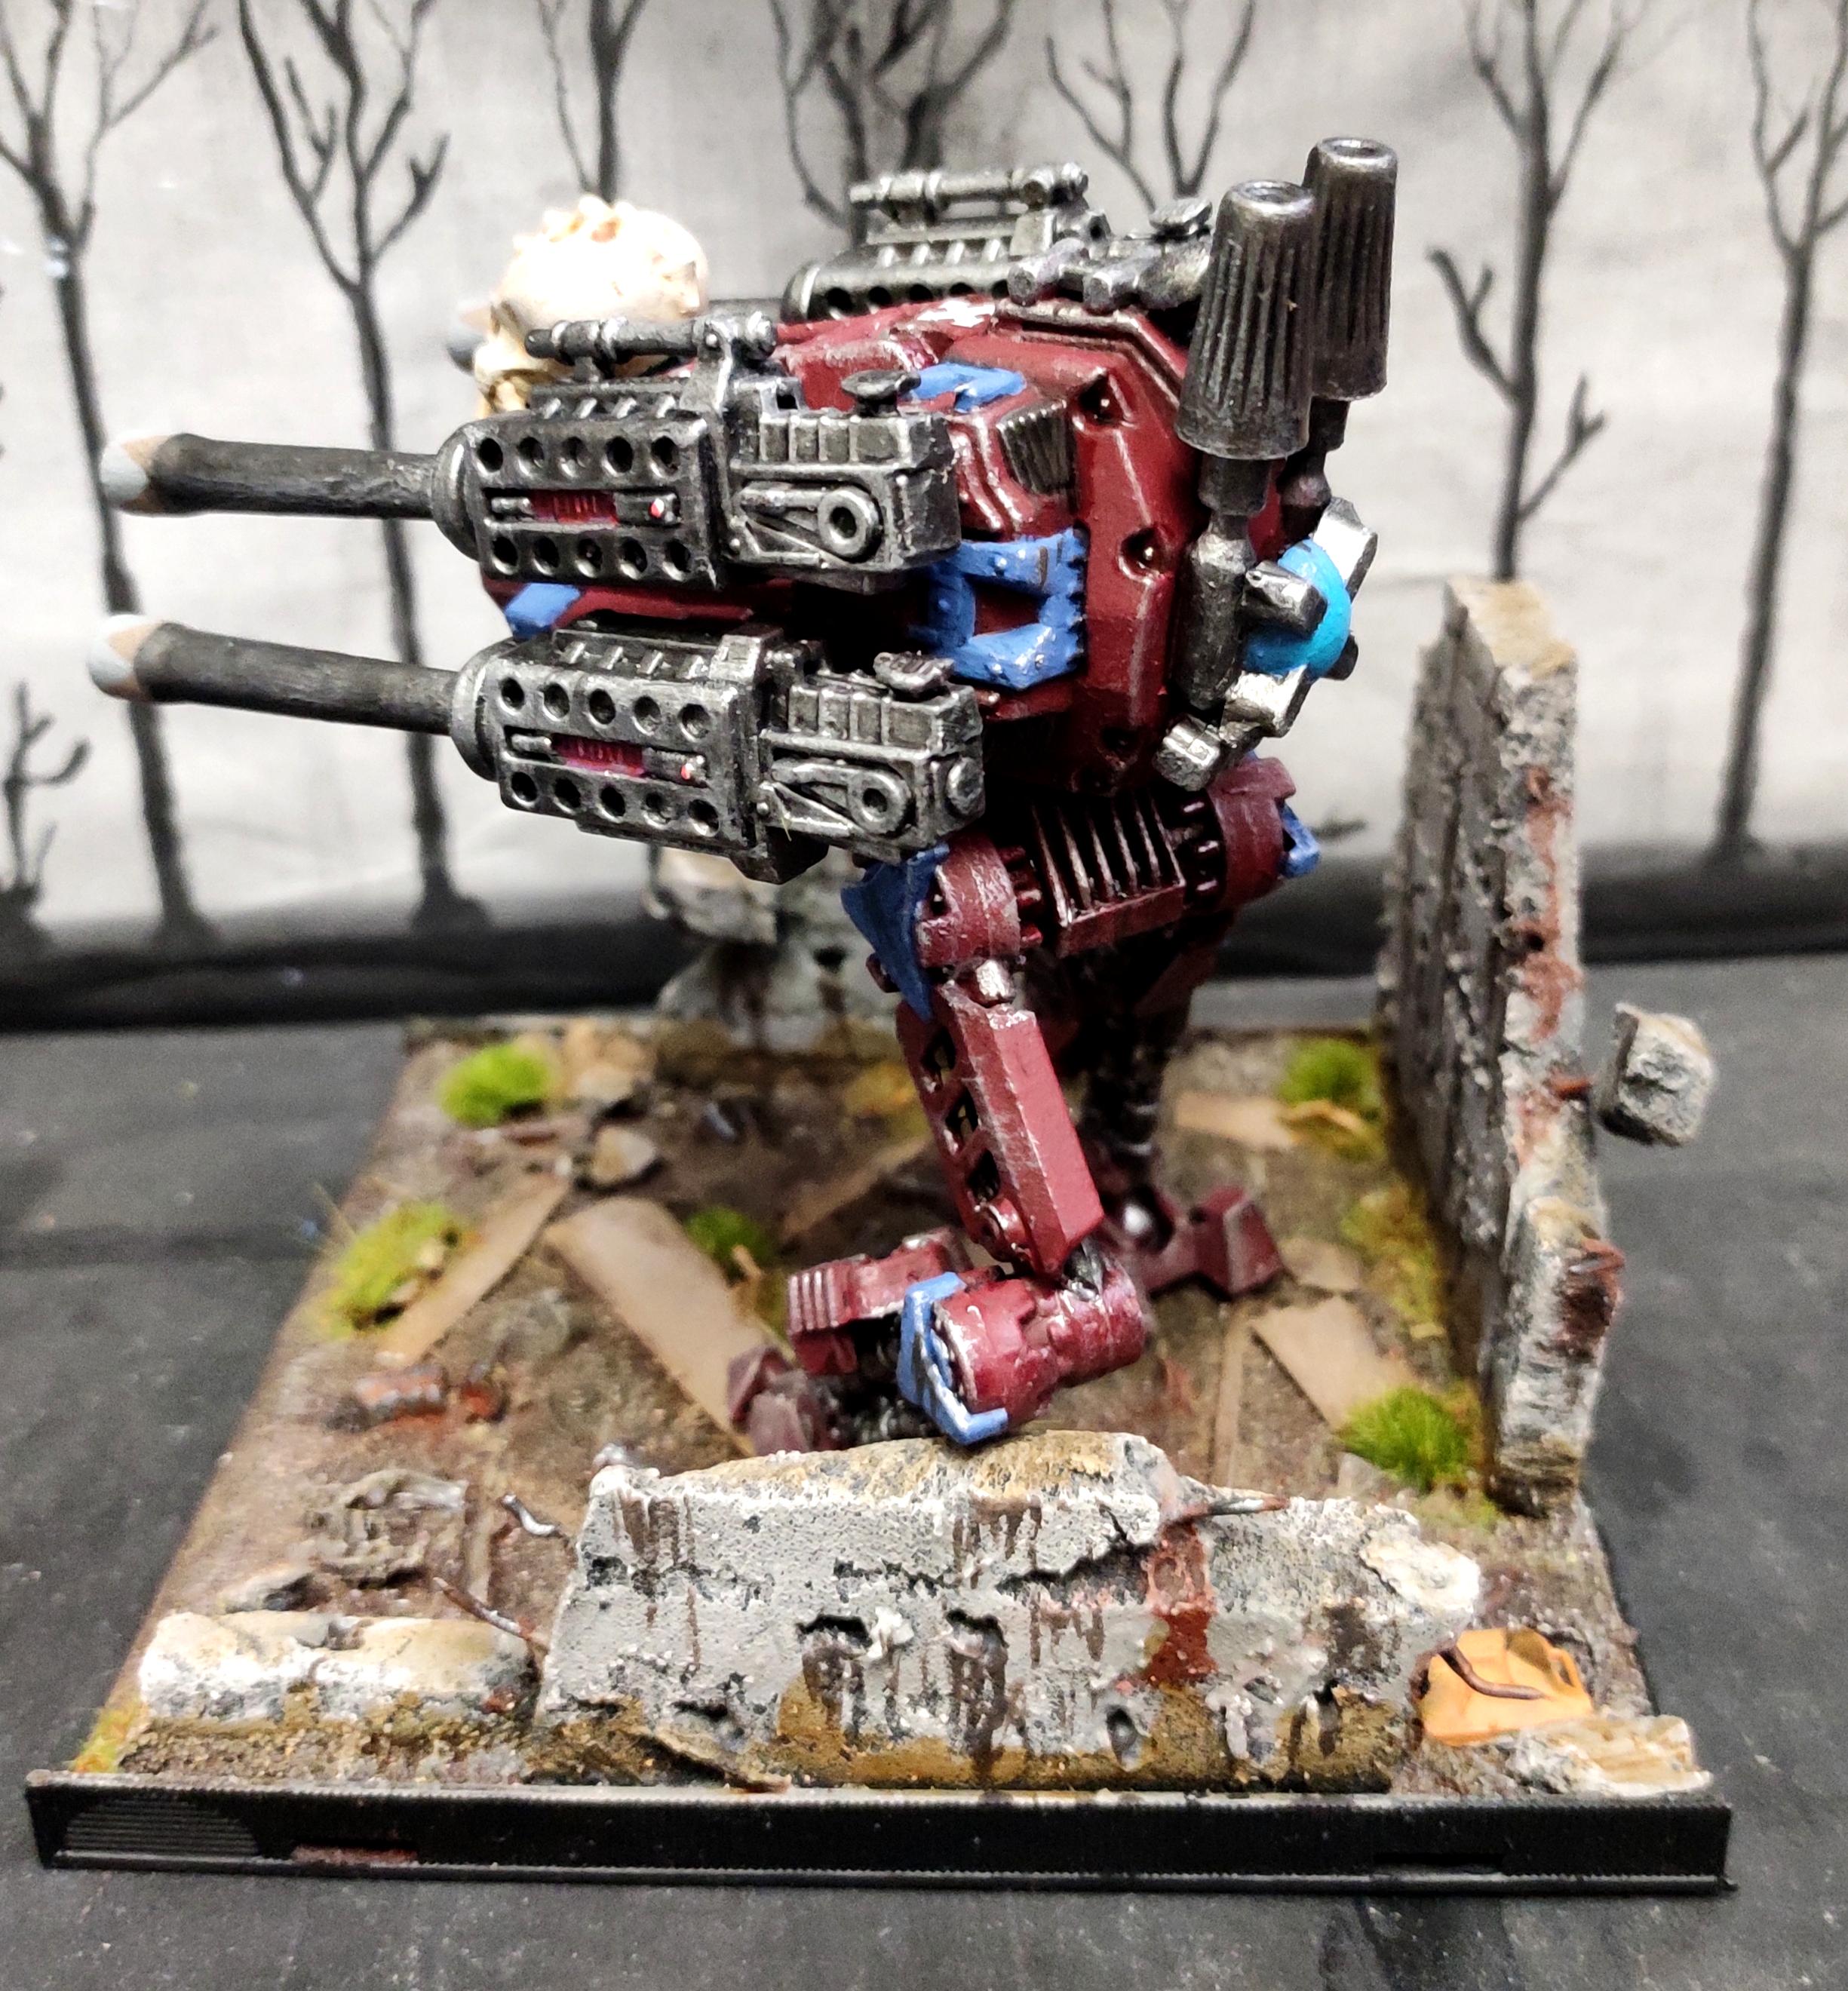 Armored Vehicle, Bronekorpus, Conversion, Diorama, From Russia, Heavy Support, Kitbash, Mech, Robogear, Ruines, Scratch Building, Skull, T-rex, Tank, Technolog, Tehnolog, Walker